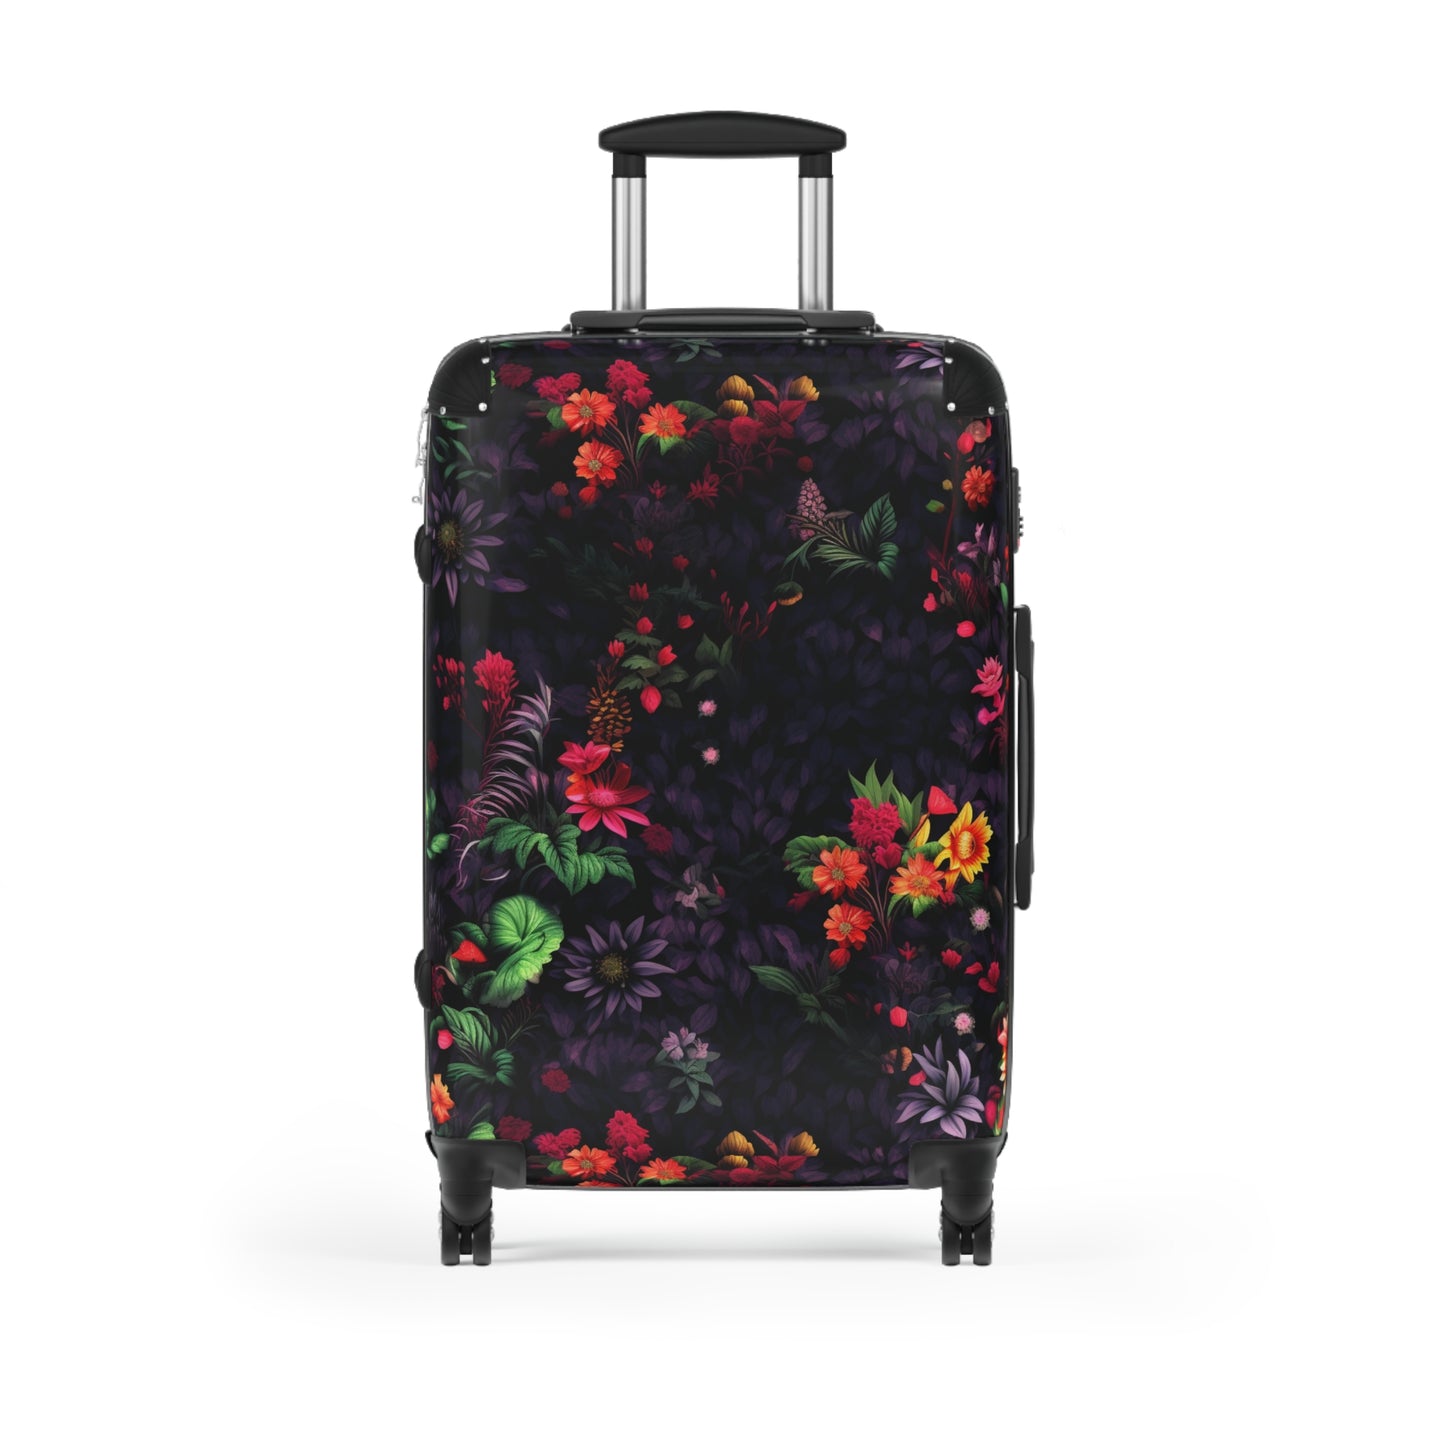 Neduz Designs Artified Floral Print Suitcase - Stylish and Durable Travel Companion